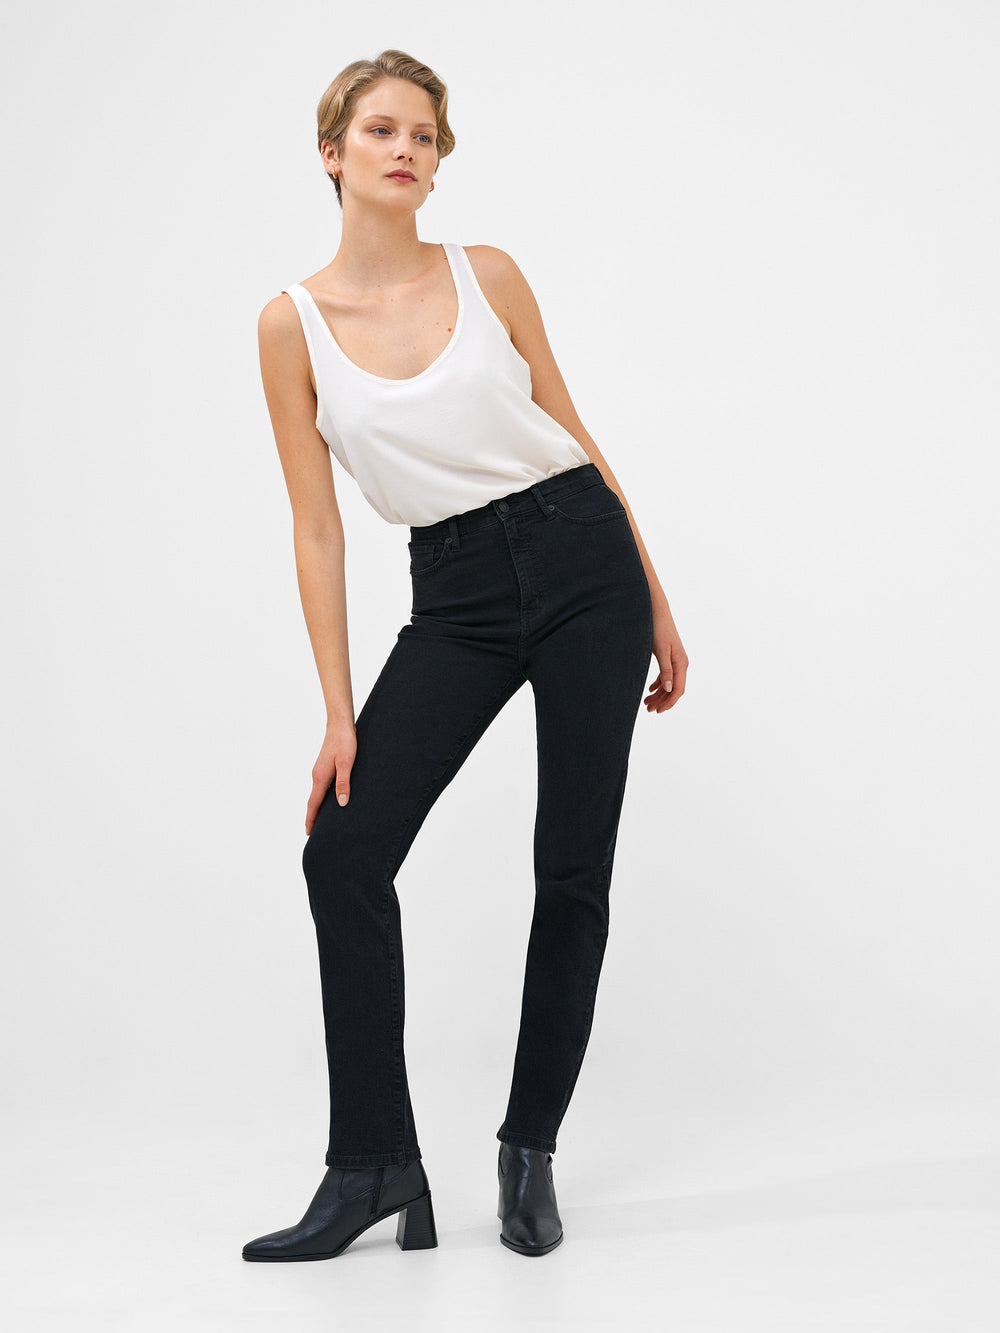 Stretch Denim Cigarette Fit High Waisted Jeans | French Connection EU